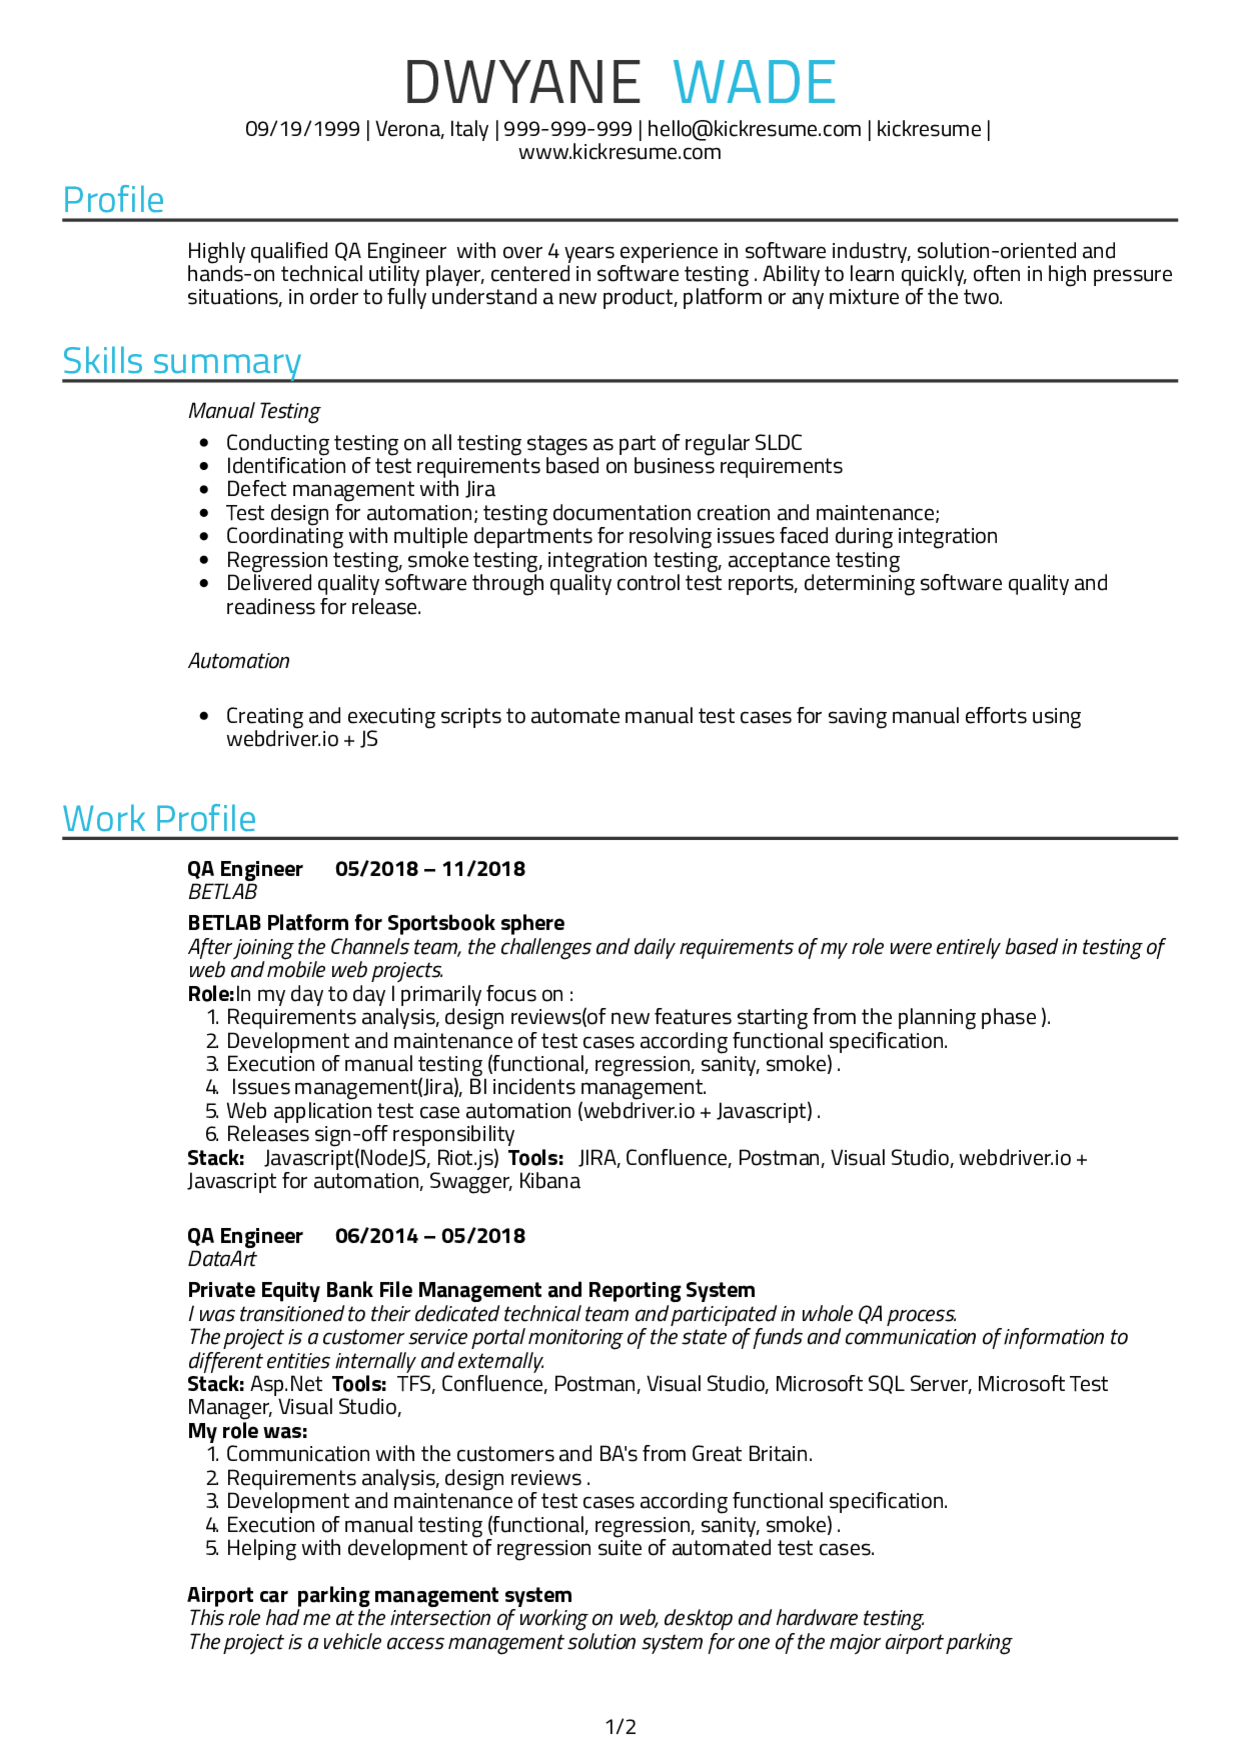 Resume Examplesreal People: Quality Assurance Engineer Intended For Software Quality Assurance Report Template